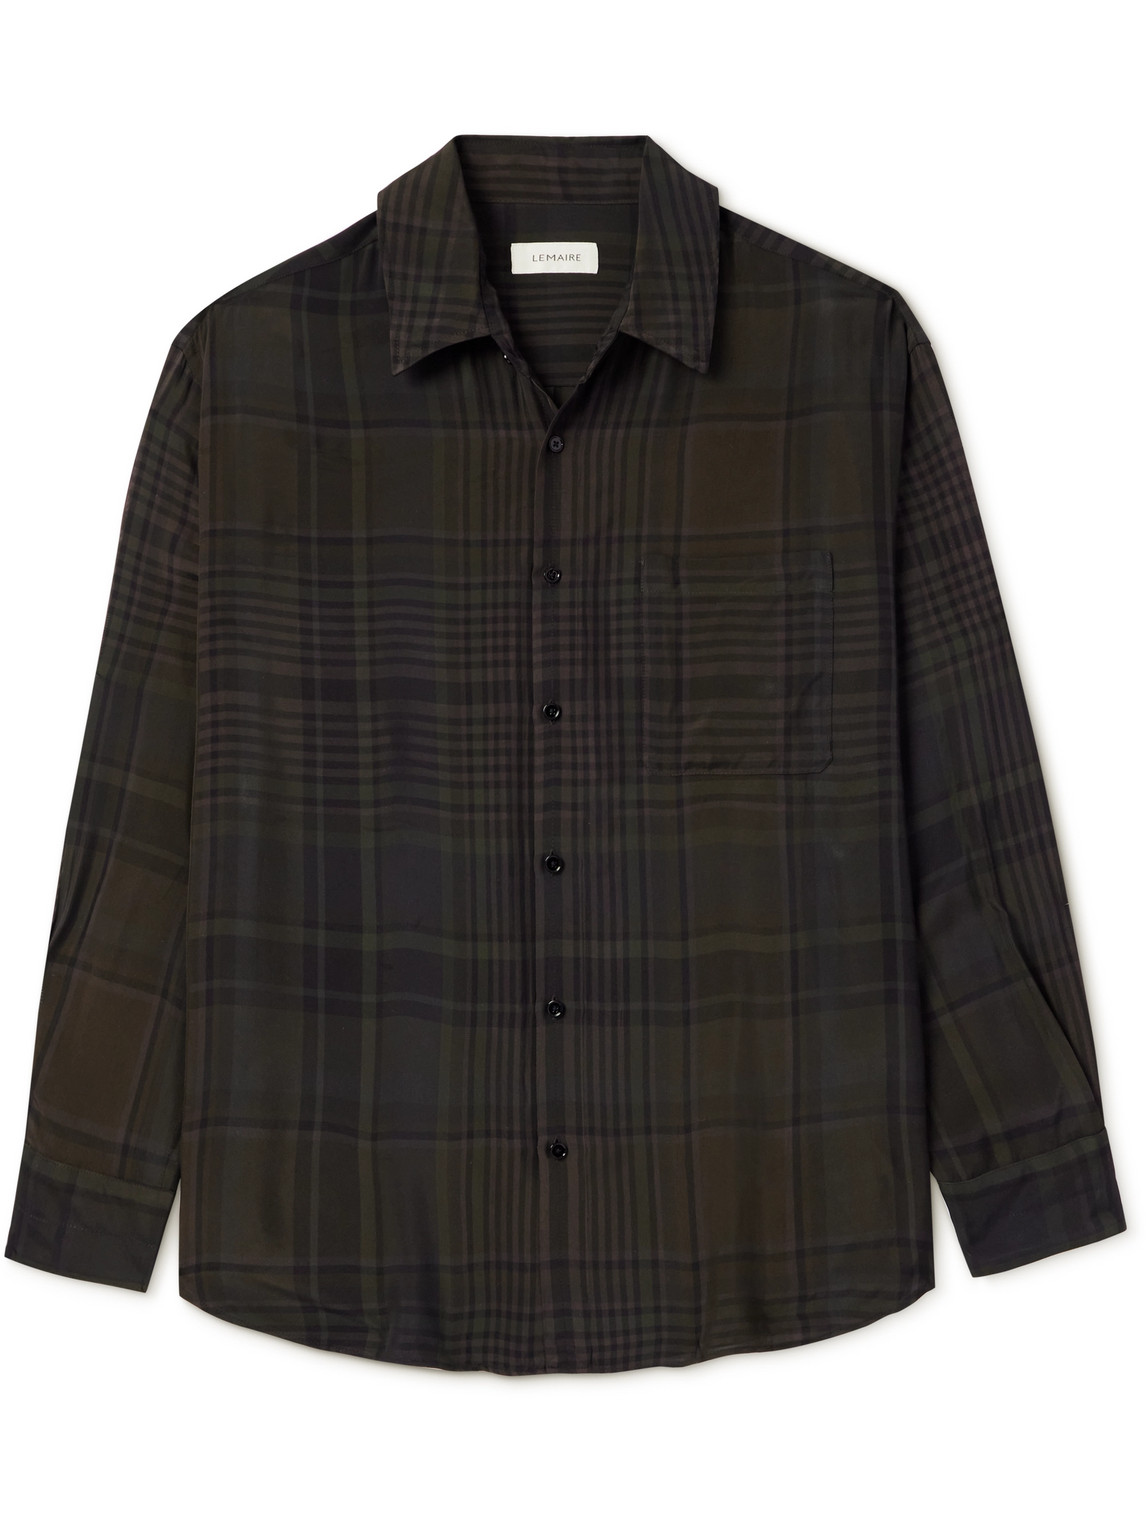 Lemaire Checked Twill Shirt In Brown